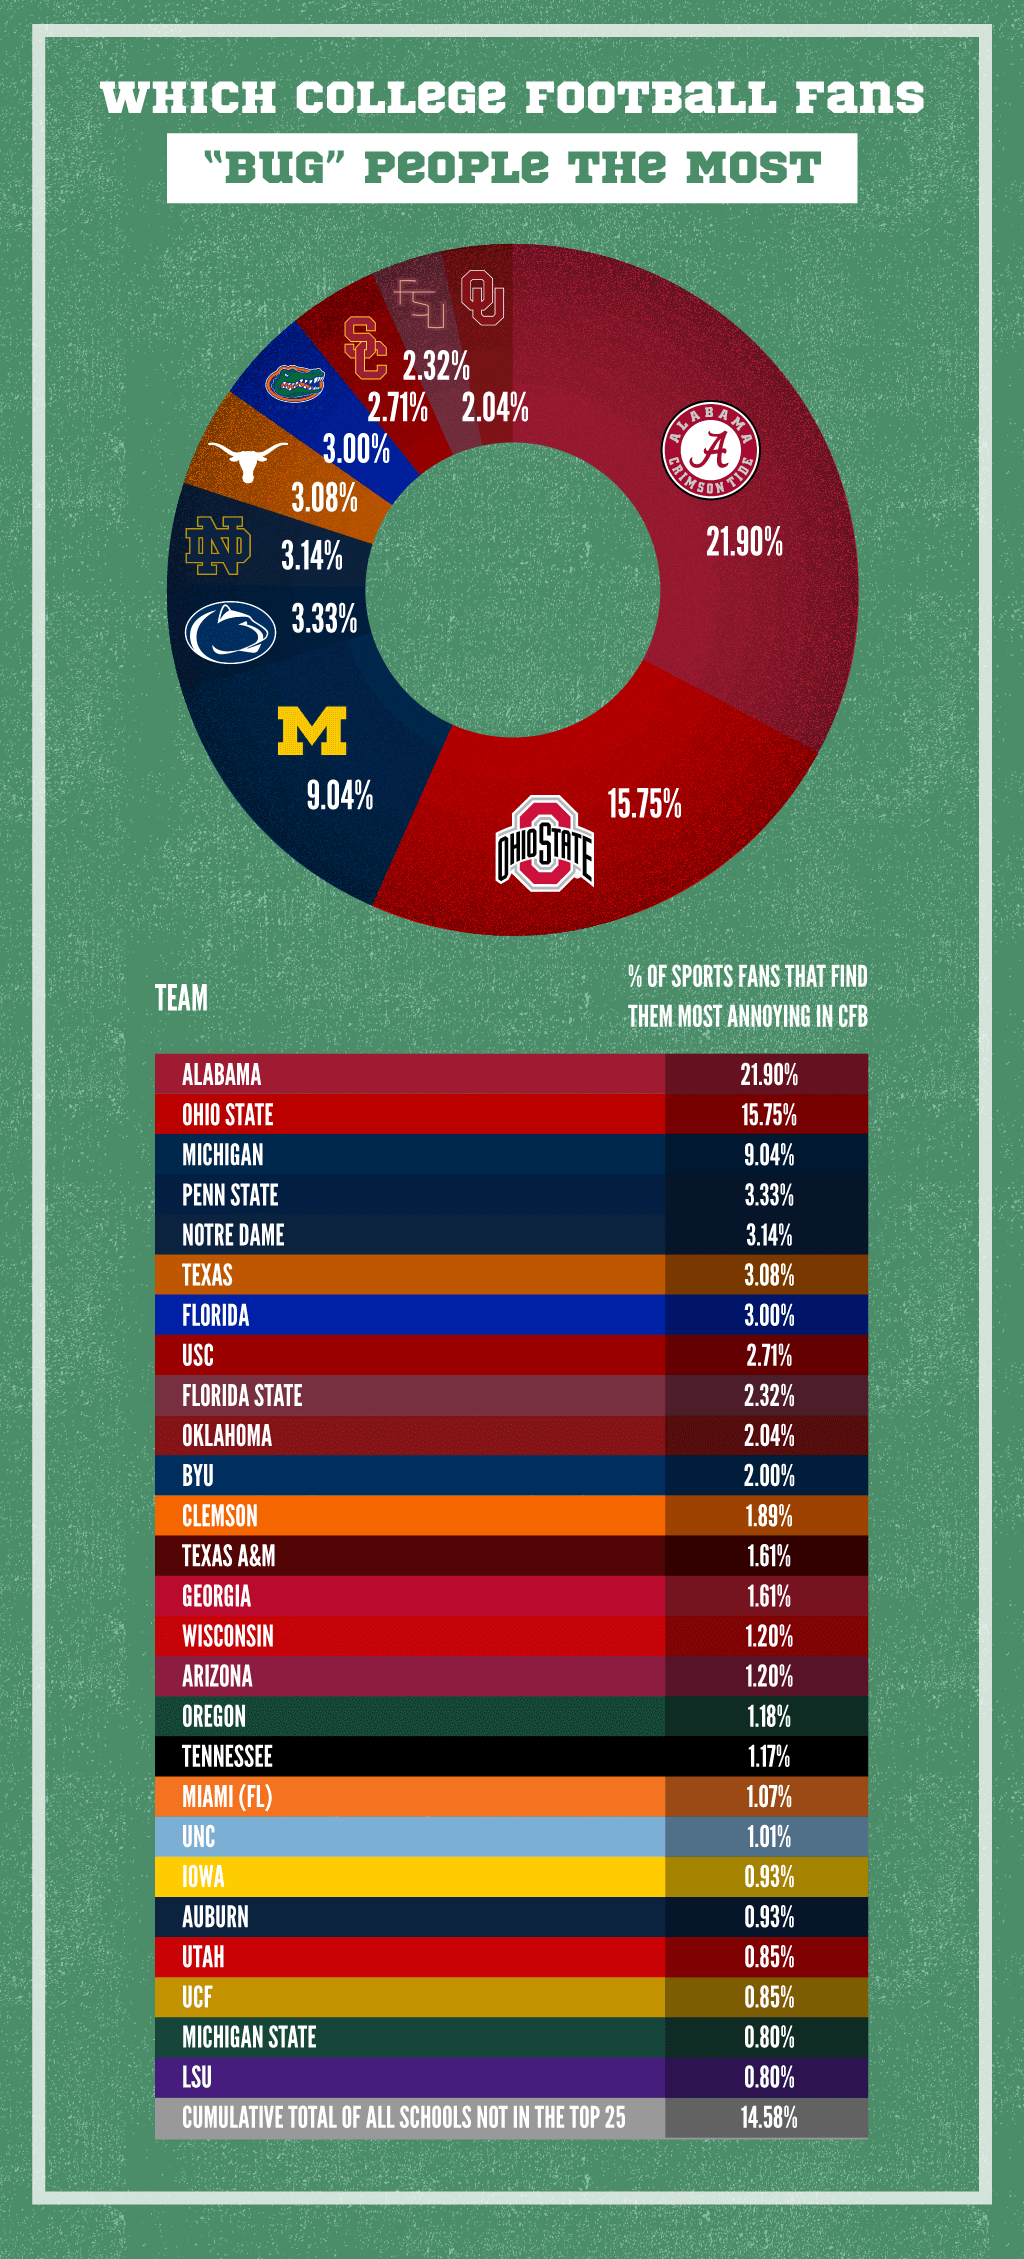 College Football Fan Study (Credit: https://insightpest.com/which-sports-fans-bug-the-most/)